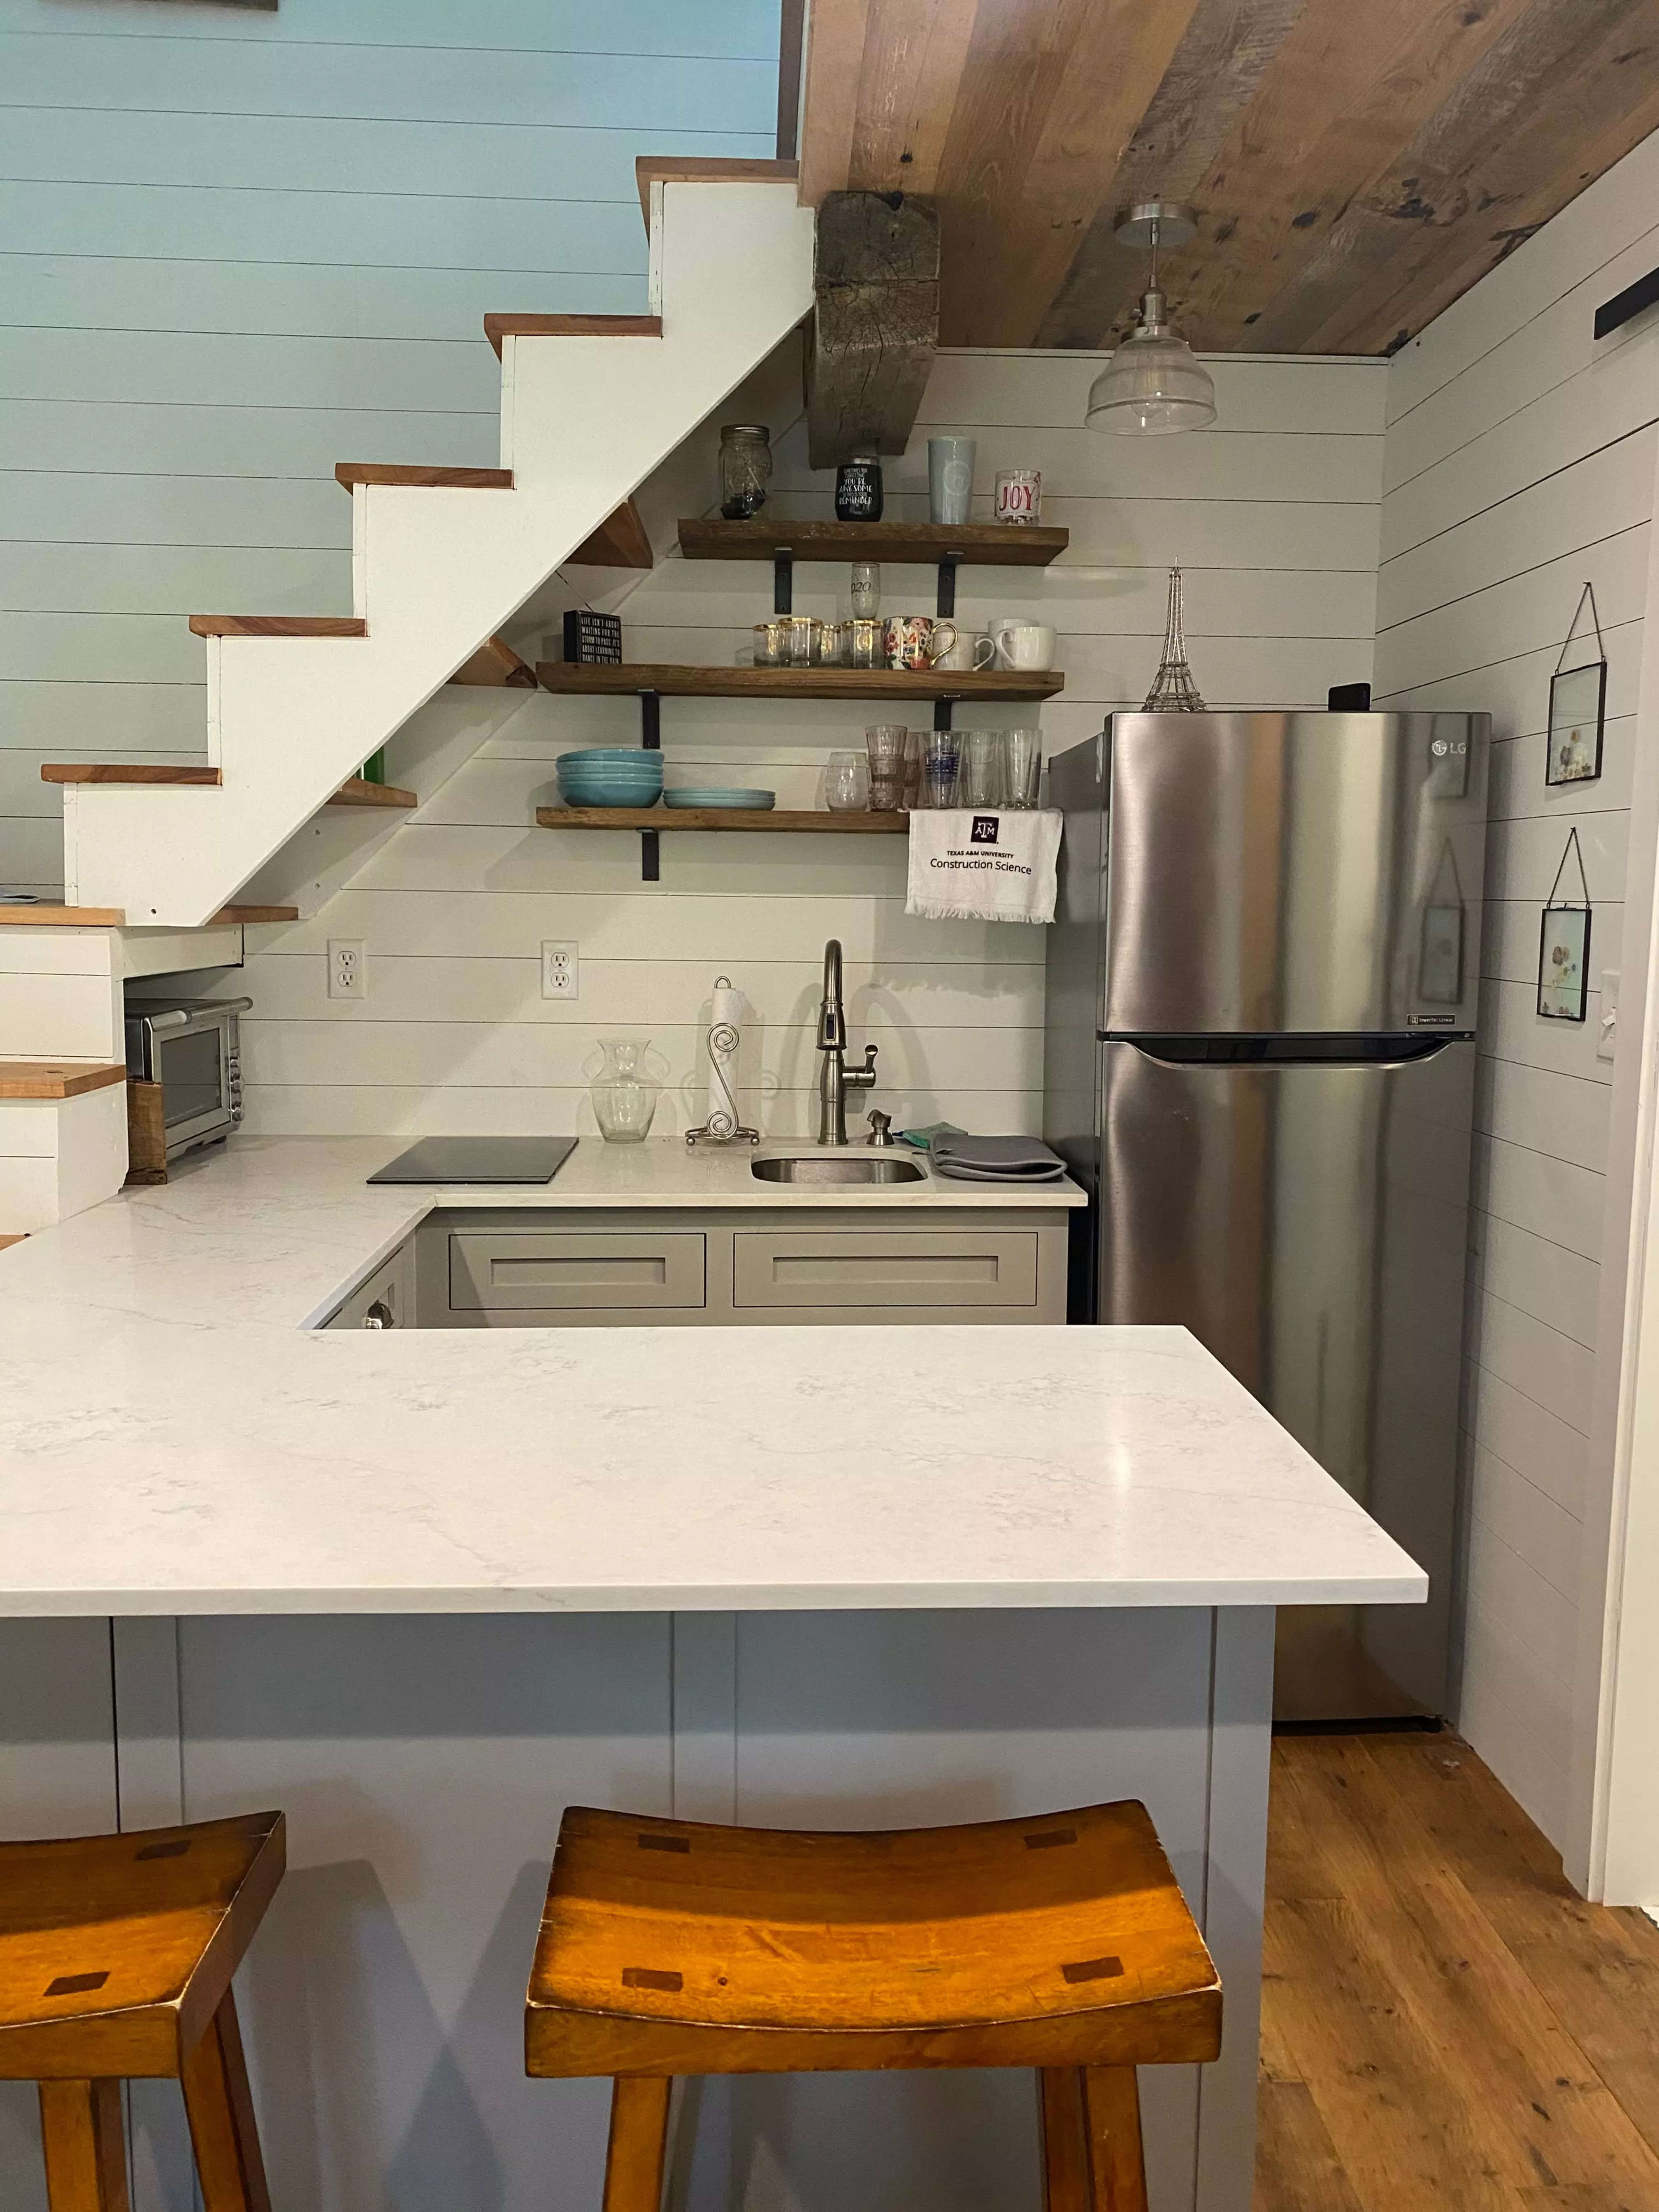 A tiny kitchen with a full-sized fridge and U-shaped countertop.